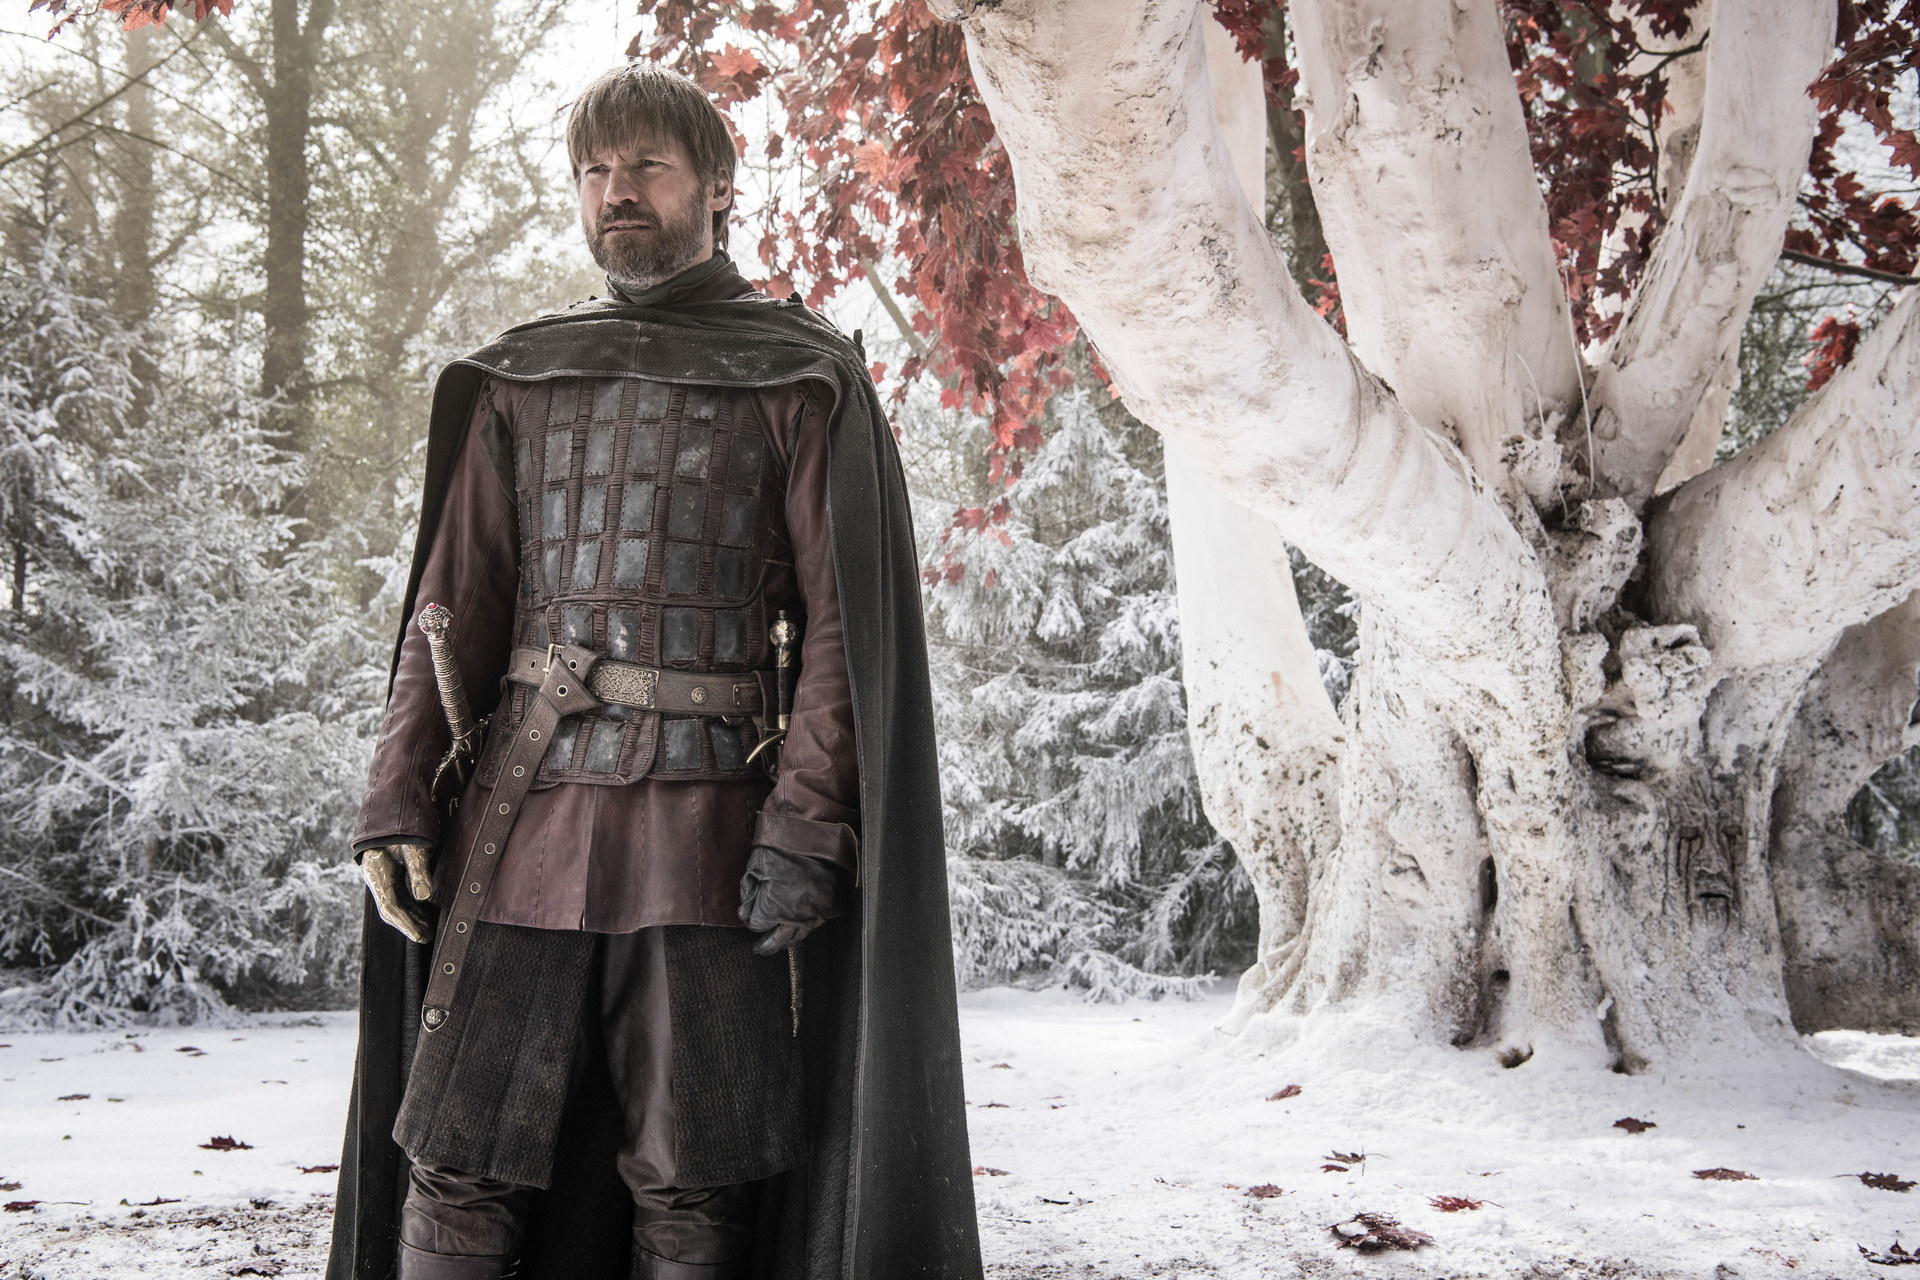 Jaime Lannister standing in the snow